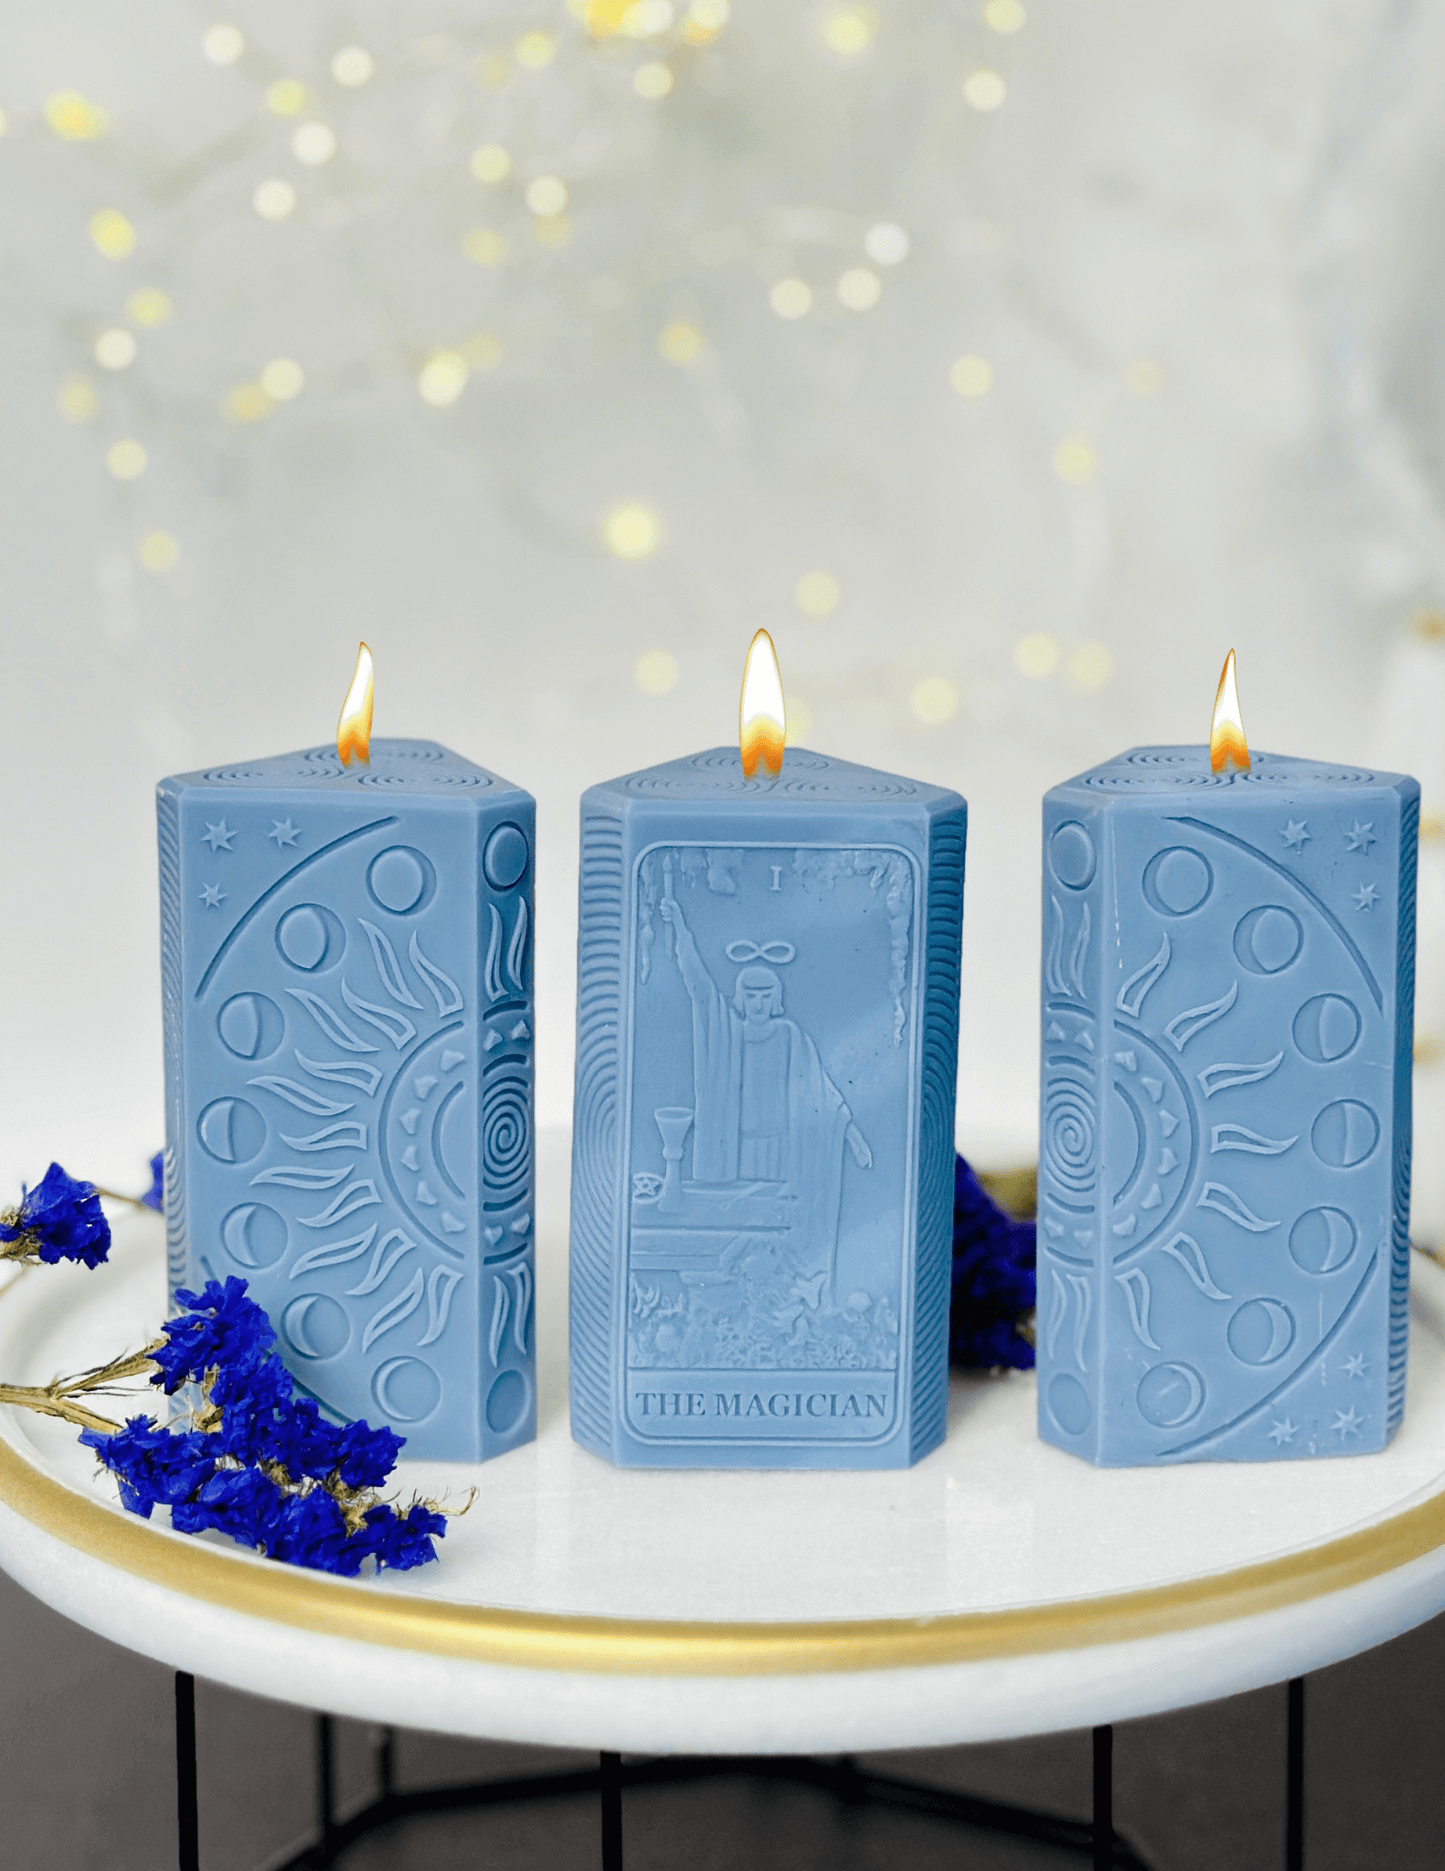 The Magician Tarot card and moon phases candle mold